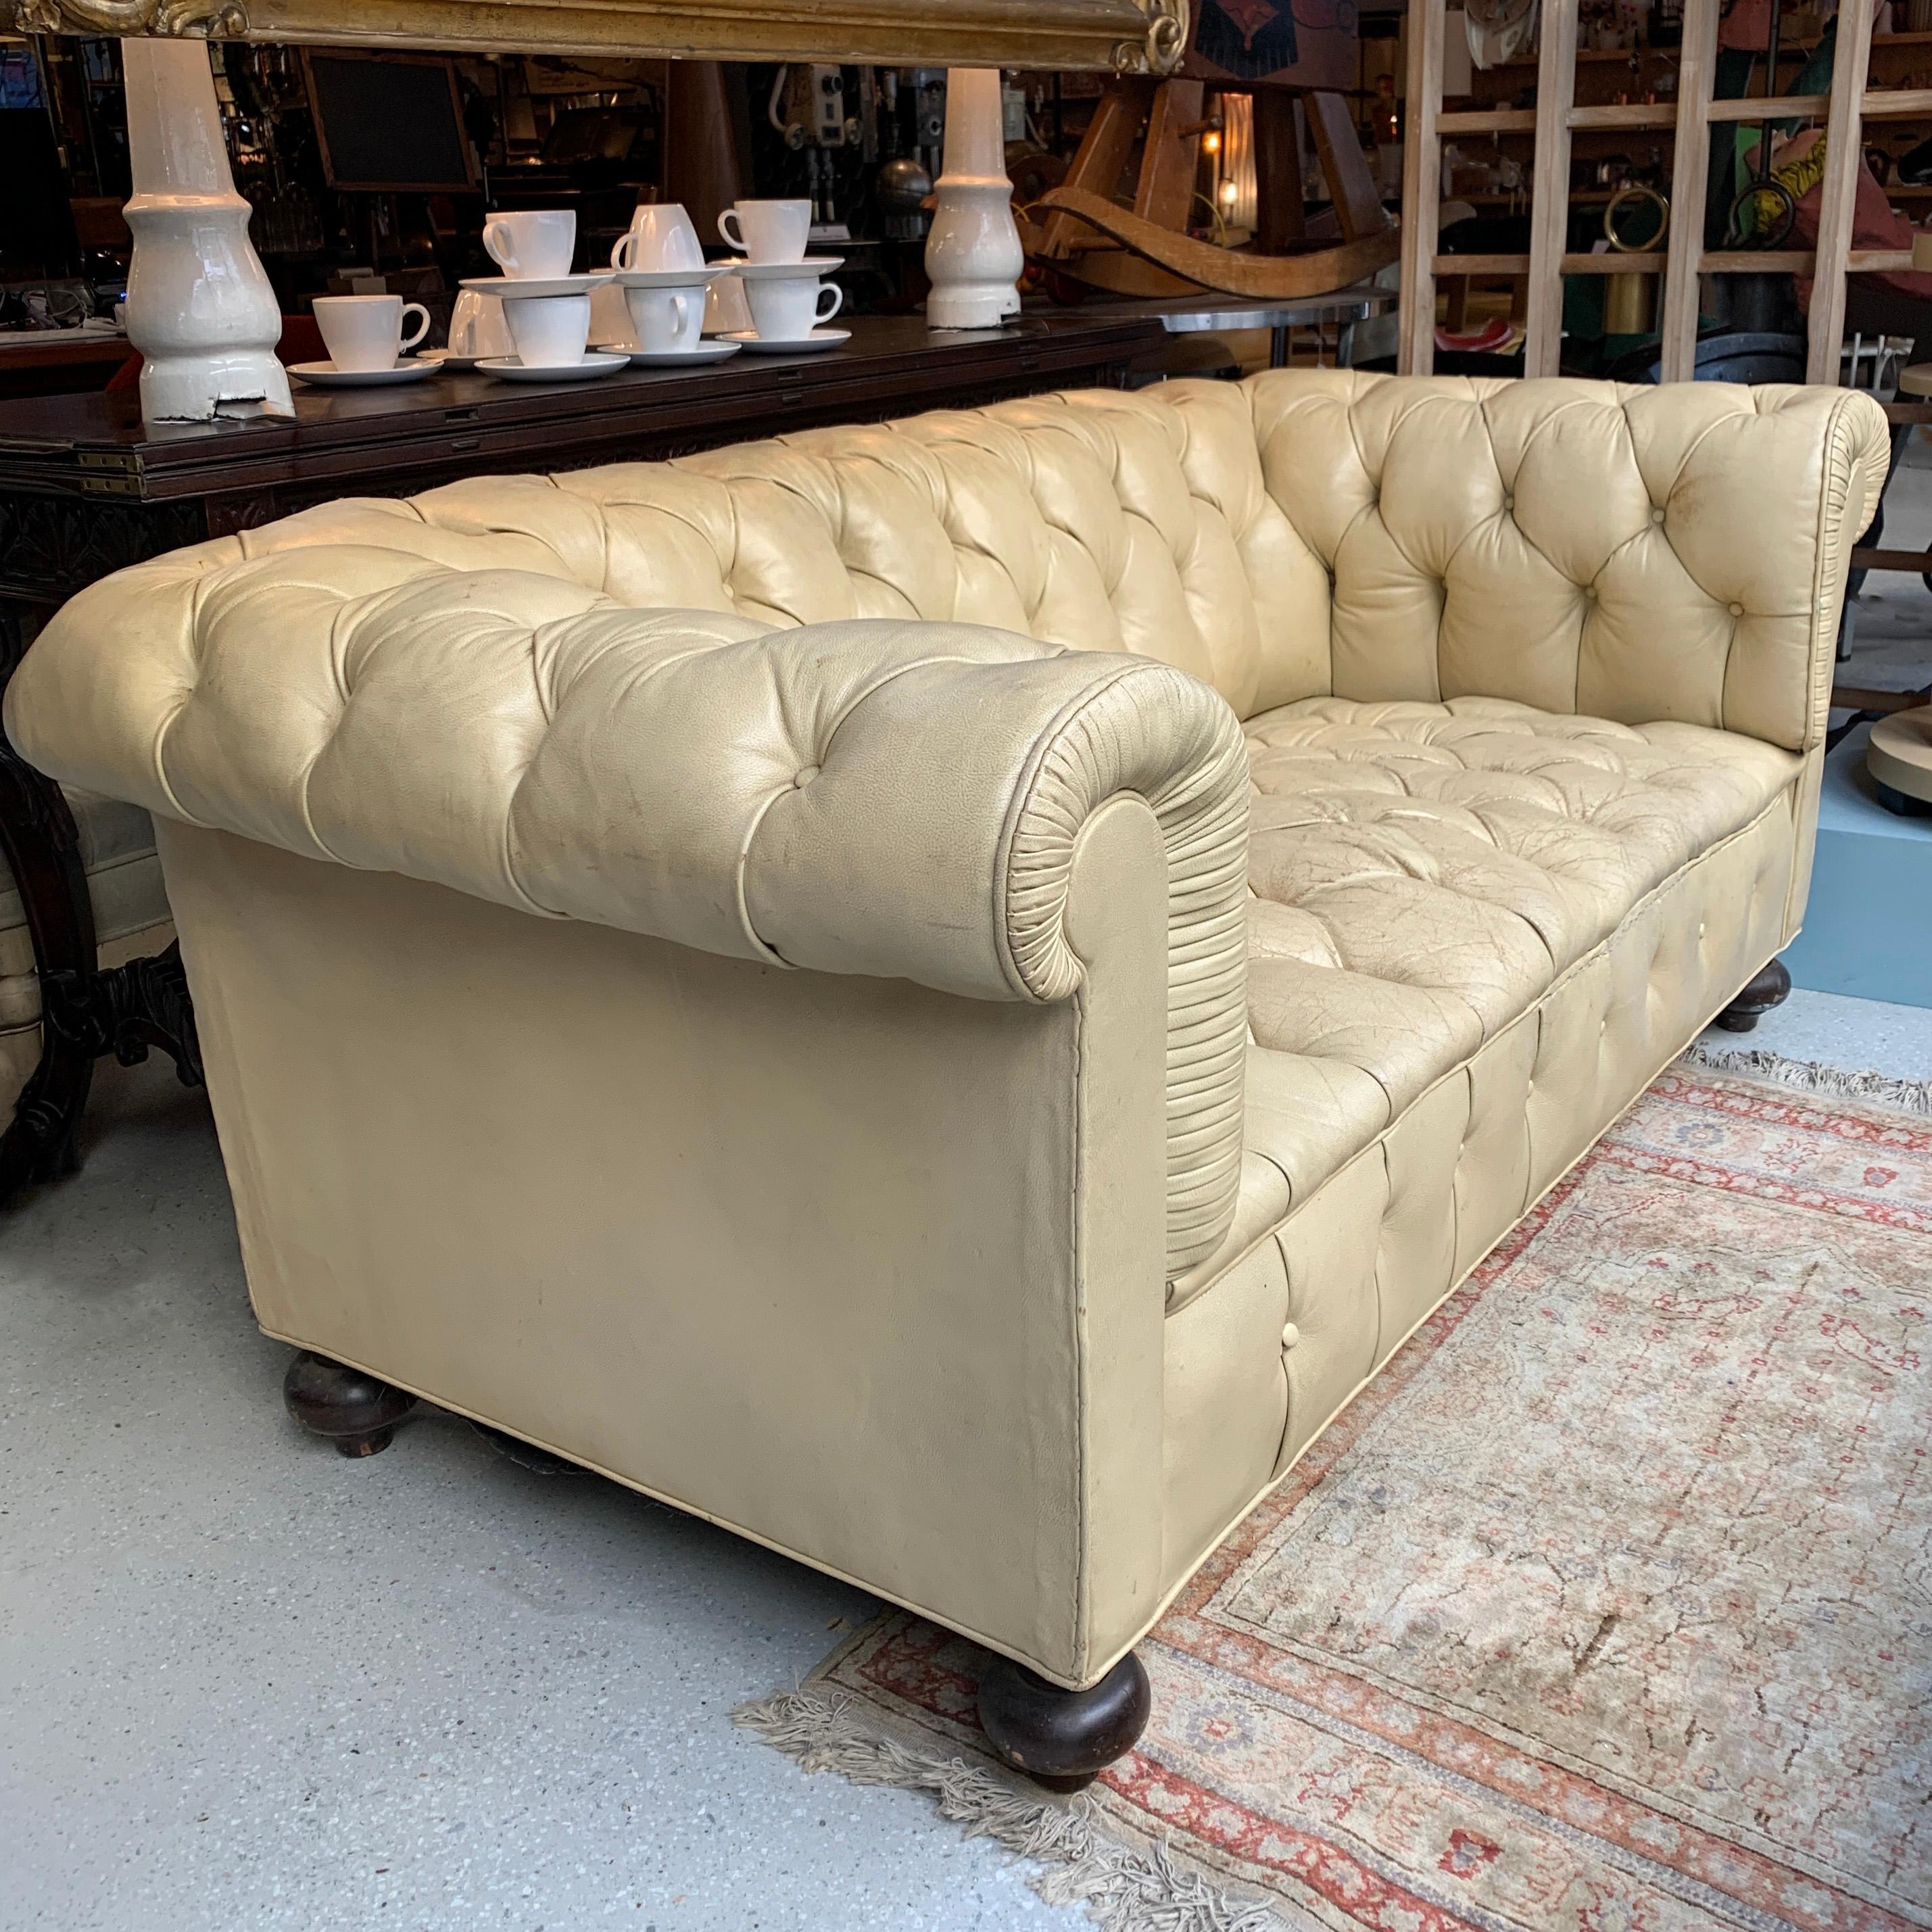 Nicely weathered, vintage, fully tufted, ecru, beige leather, Chesterfield sofa with round maple feet.